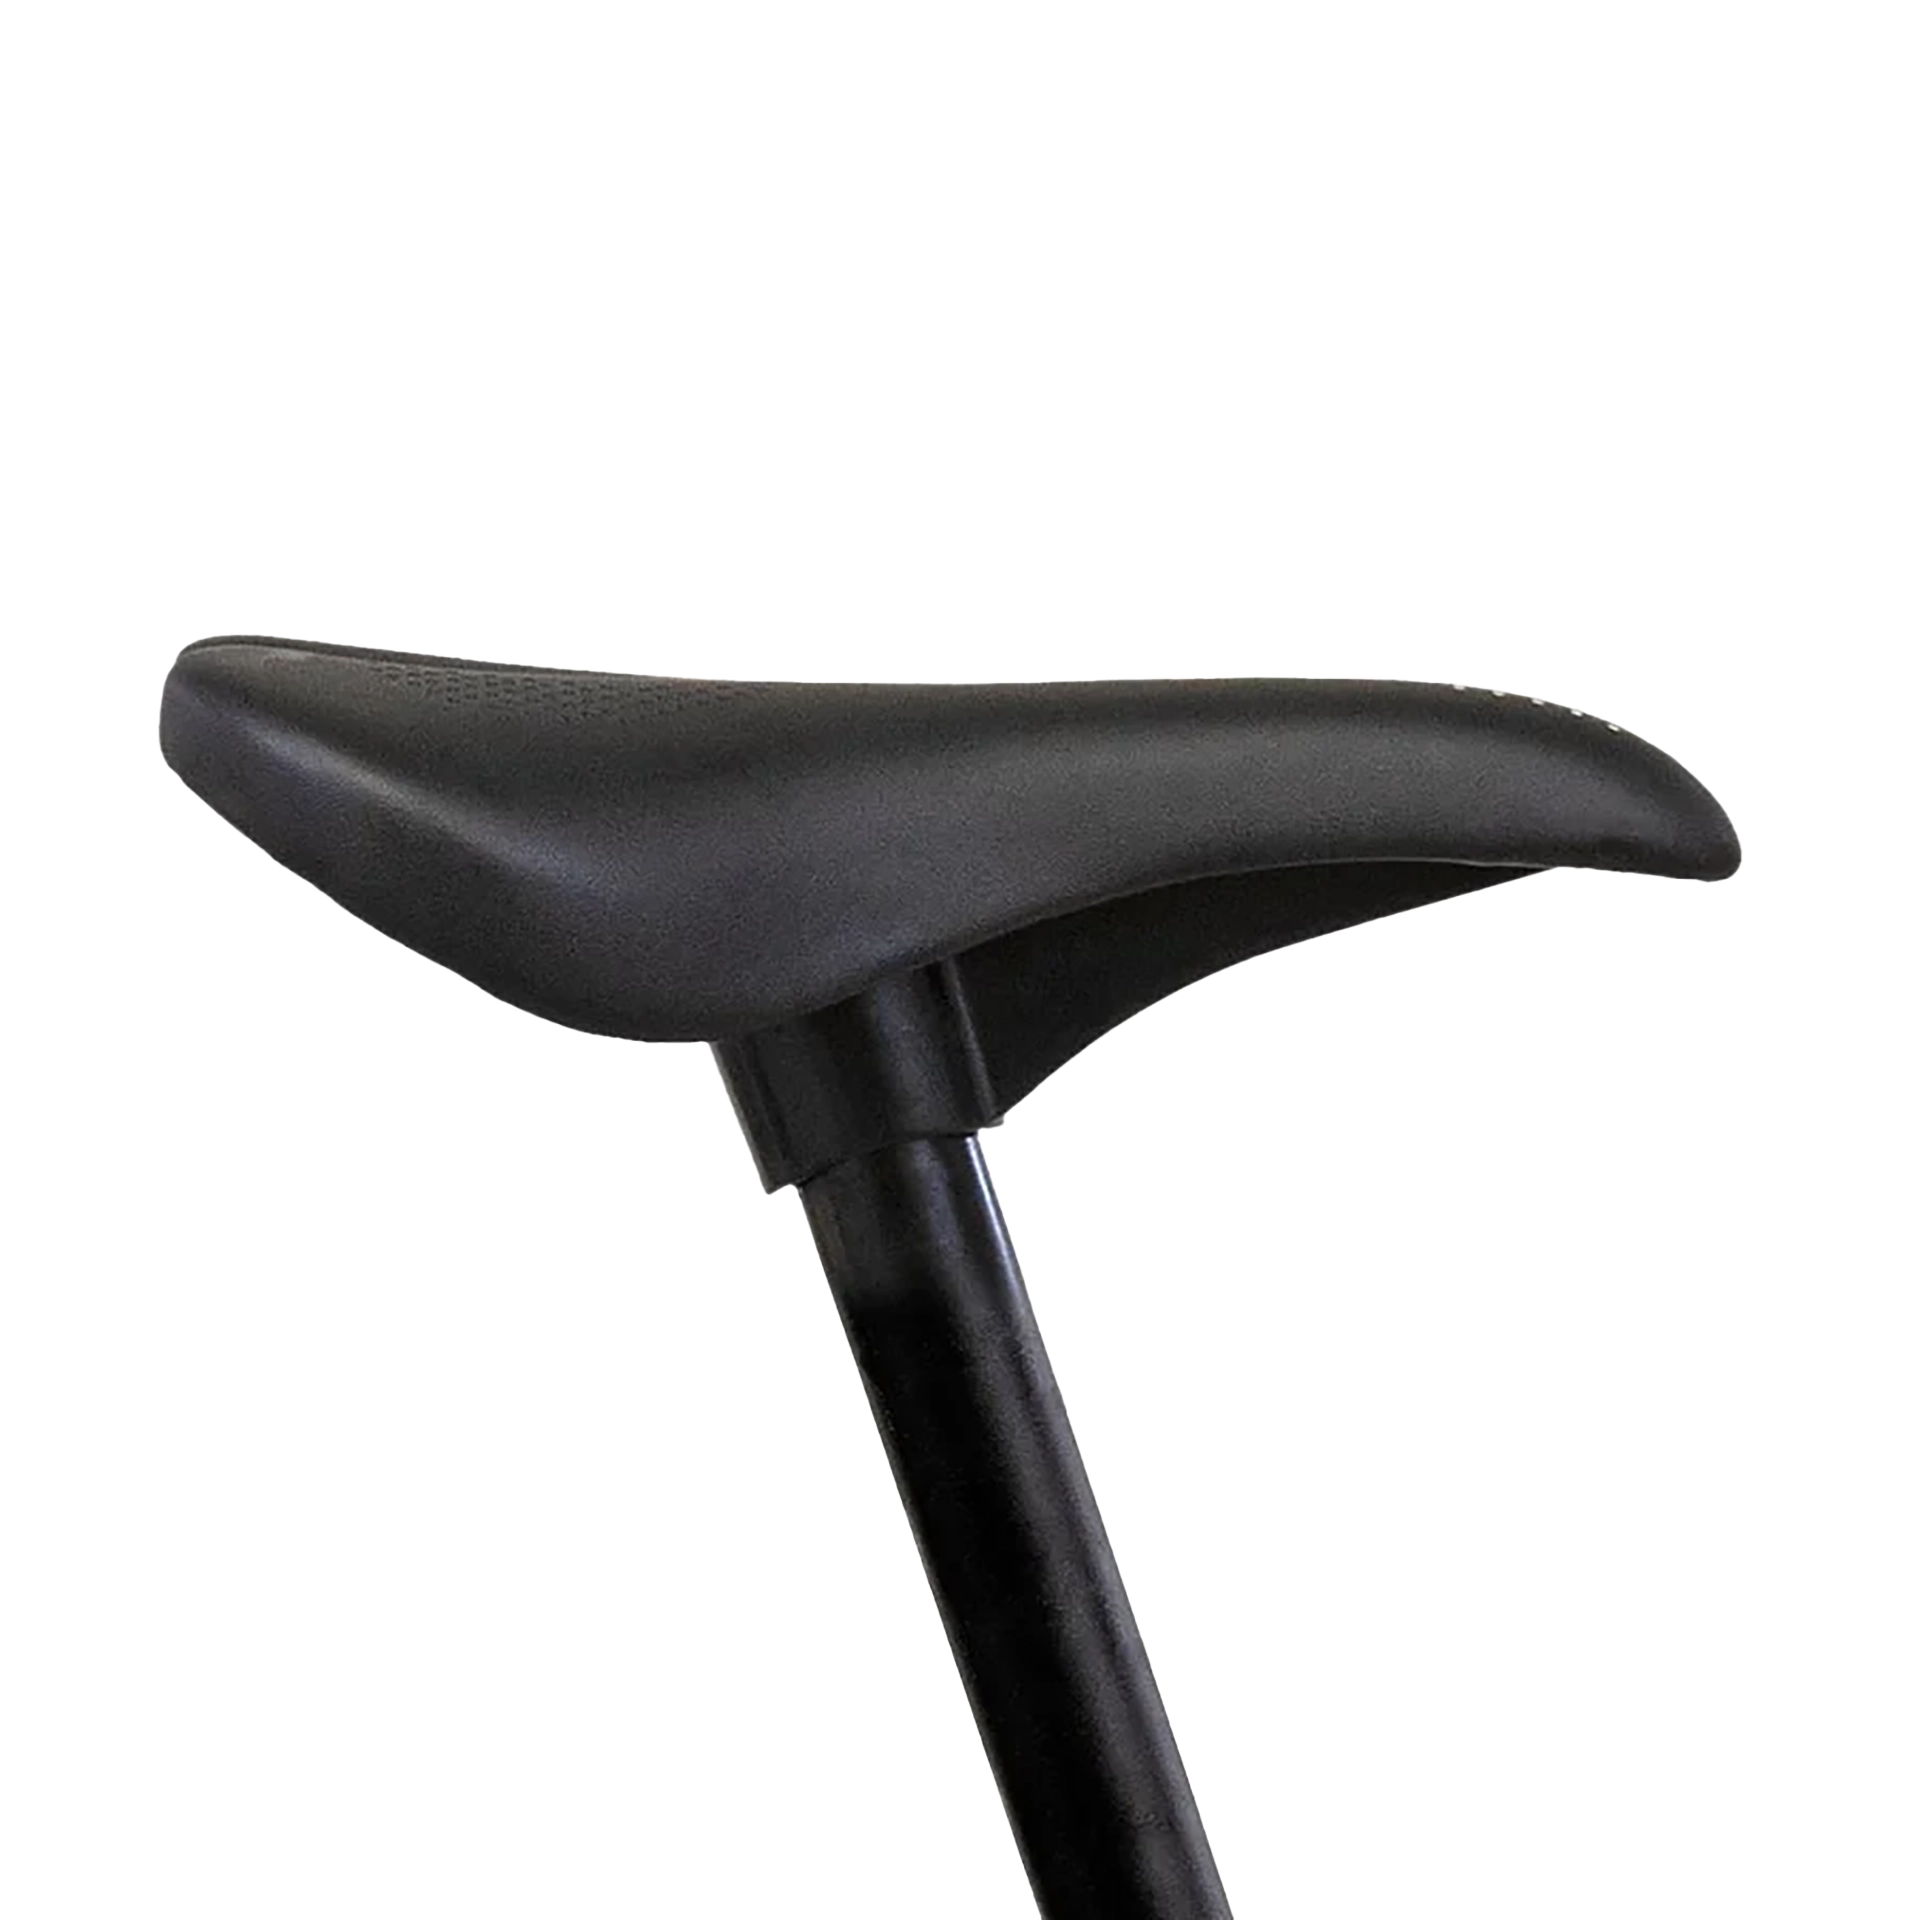 Saddle and seatpost, 25.4, 190mm, Cnoc 14 Large, Cnoc 16, Cnoc 18